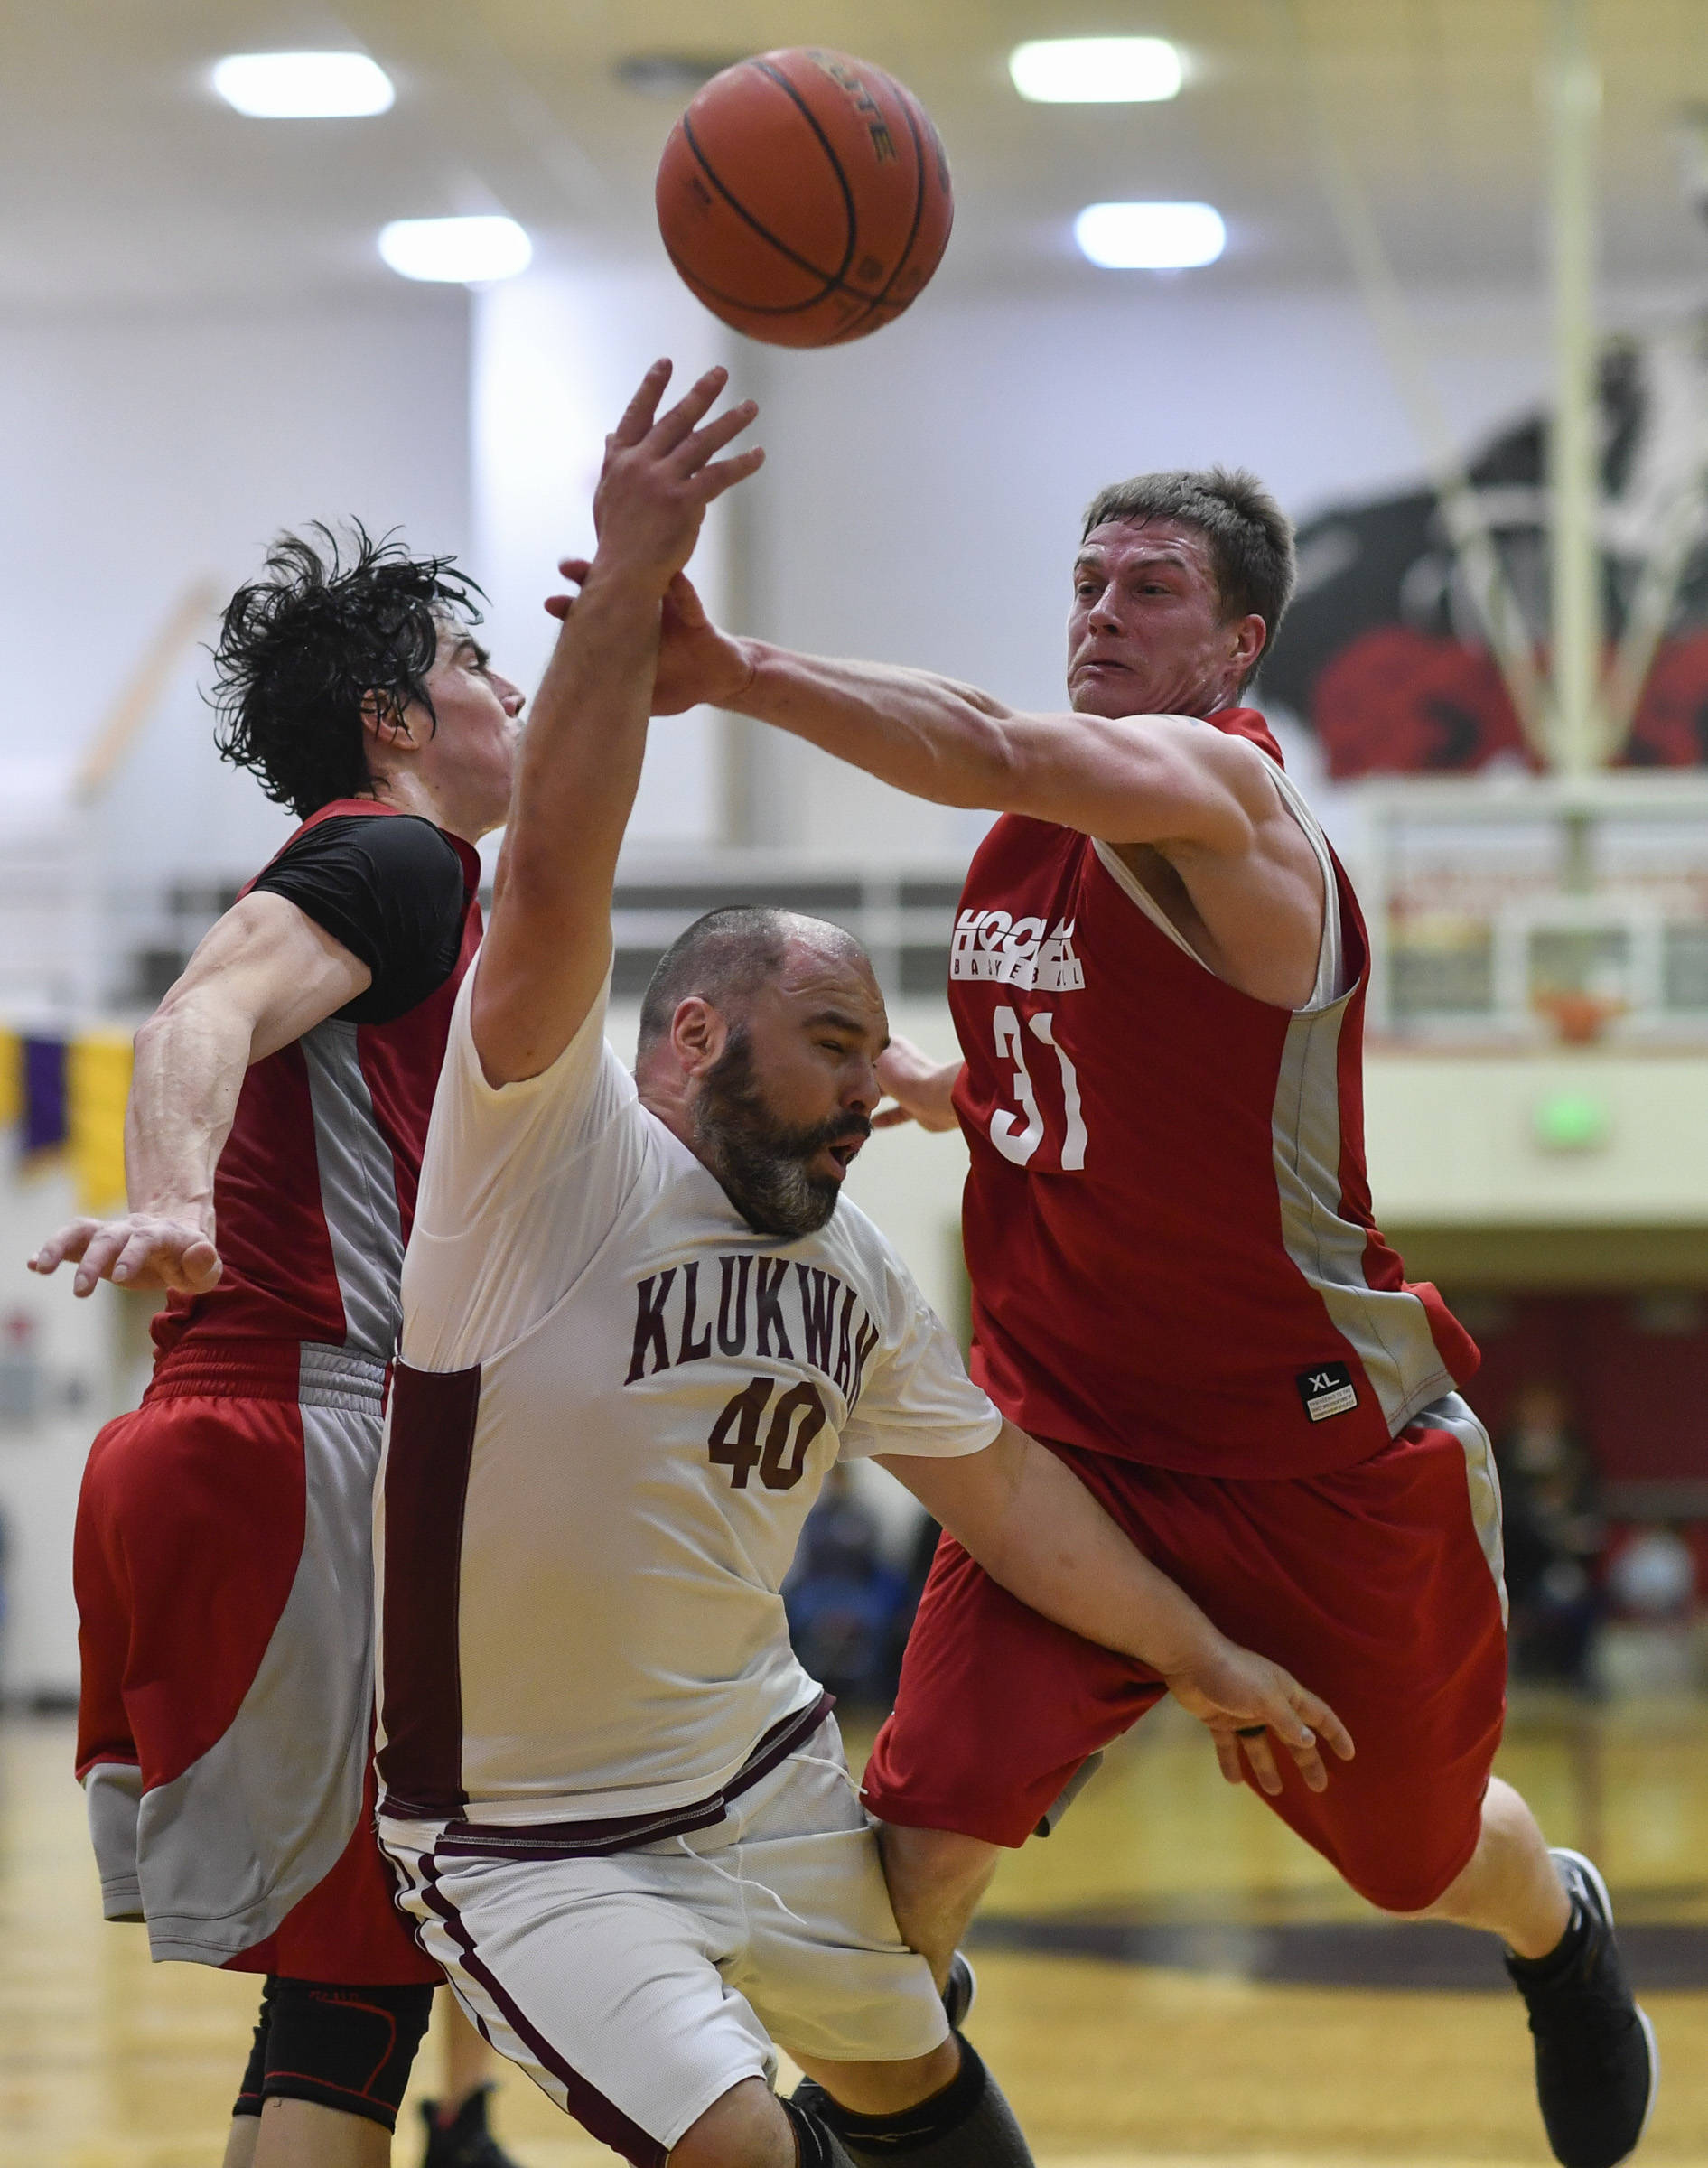 Klukwan’s Stuart DeWitt, center, attempts to score on Hoonah’s Donald Dybdahl, left, and Greg Strout during their C bracket game at the Juneau Lions Club 73rd Annual Gold Medal Basketball Tournament at Juneau-Douglas High School on Friday, March 22, 2019. Klukwan won 88-67. (Michael Penn | Juneau Empire)